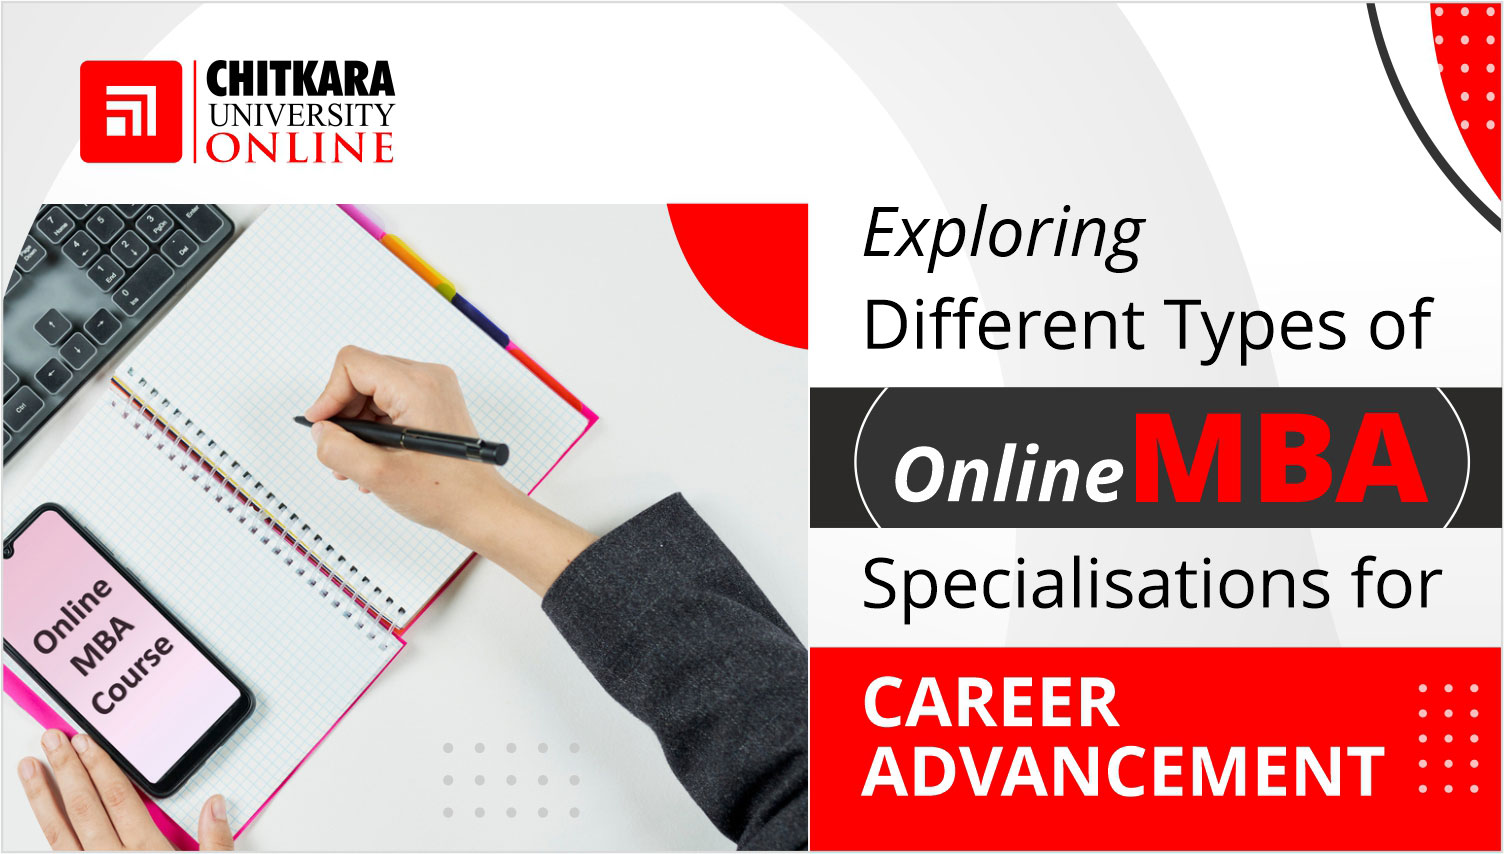 Online MBA Specialisations for Career Advancement | ChitkaraU Online